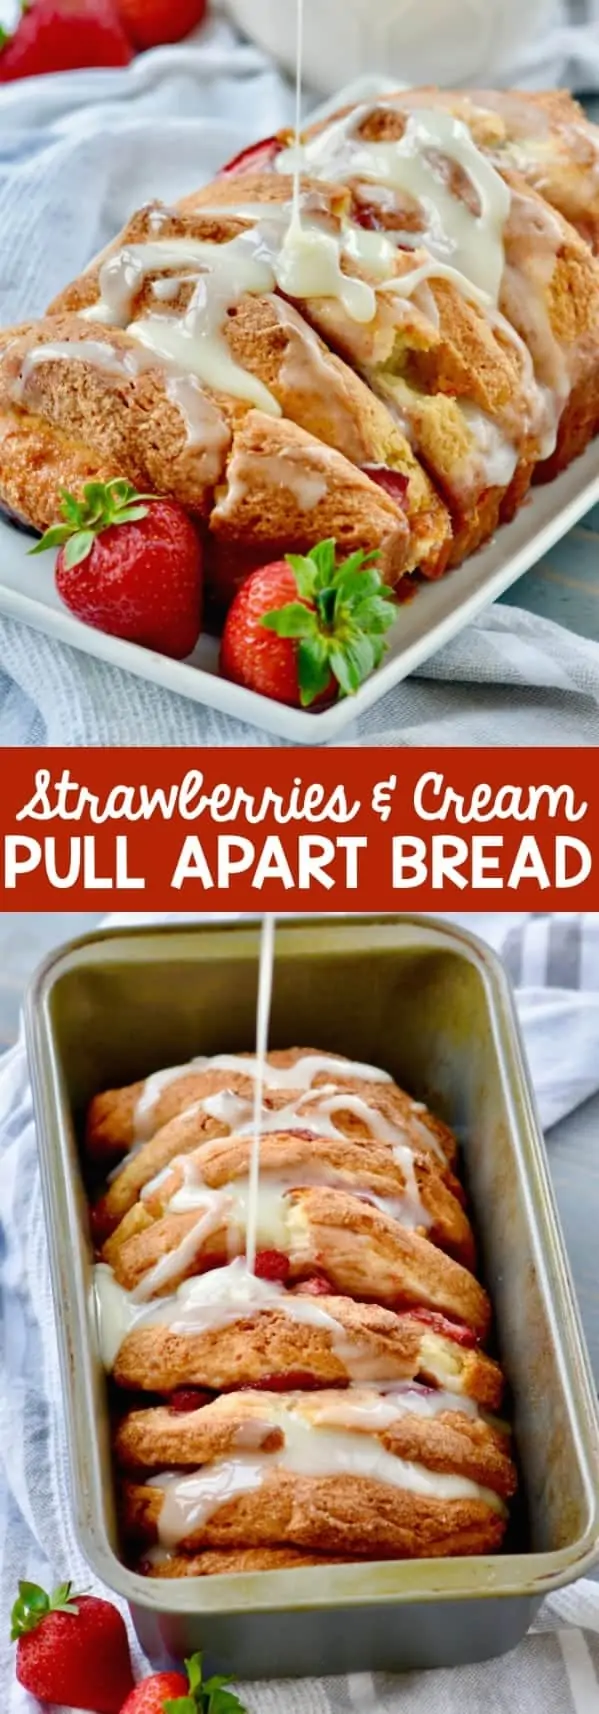 On a white plate, the Strawberries and Cream Pull Apart Bread has a beautiful golden brown crust, and some white cream is being drizzled on top of it. 